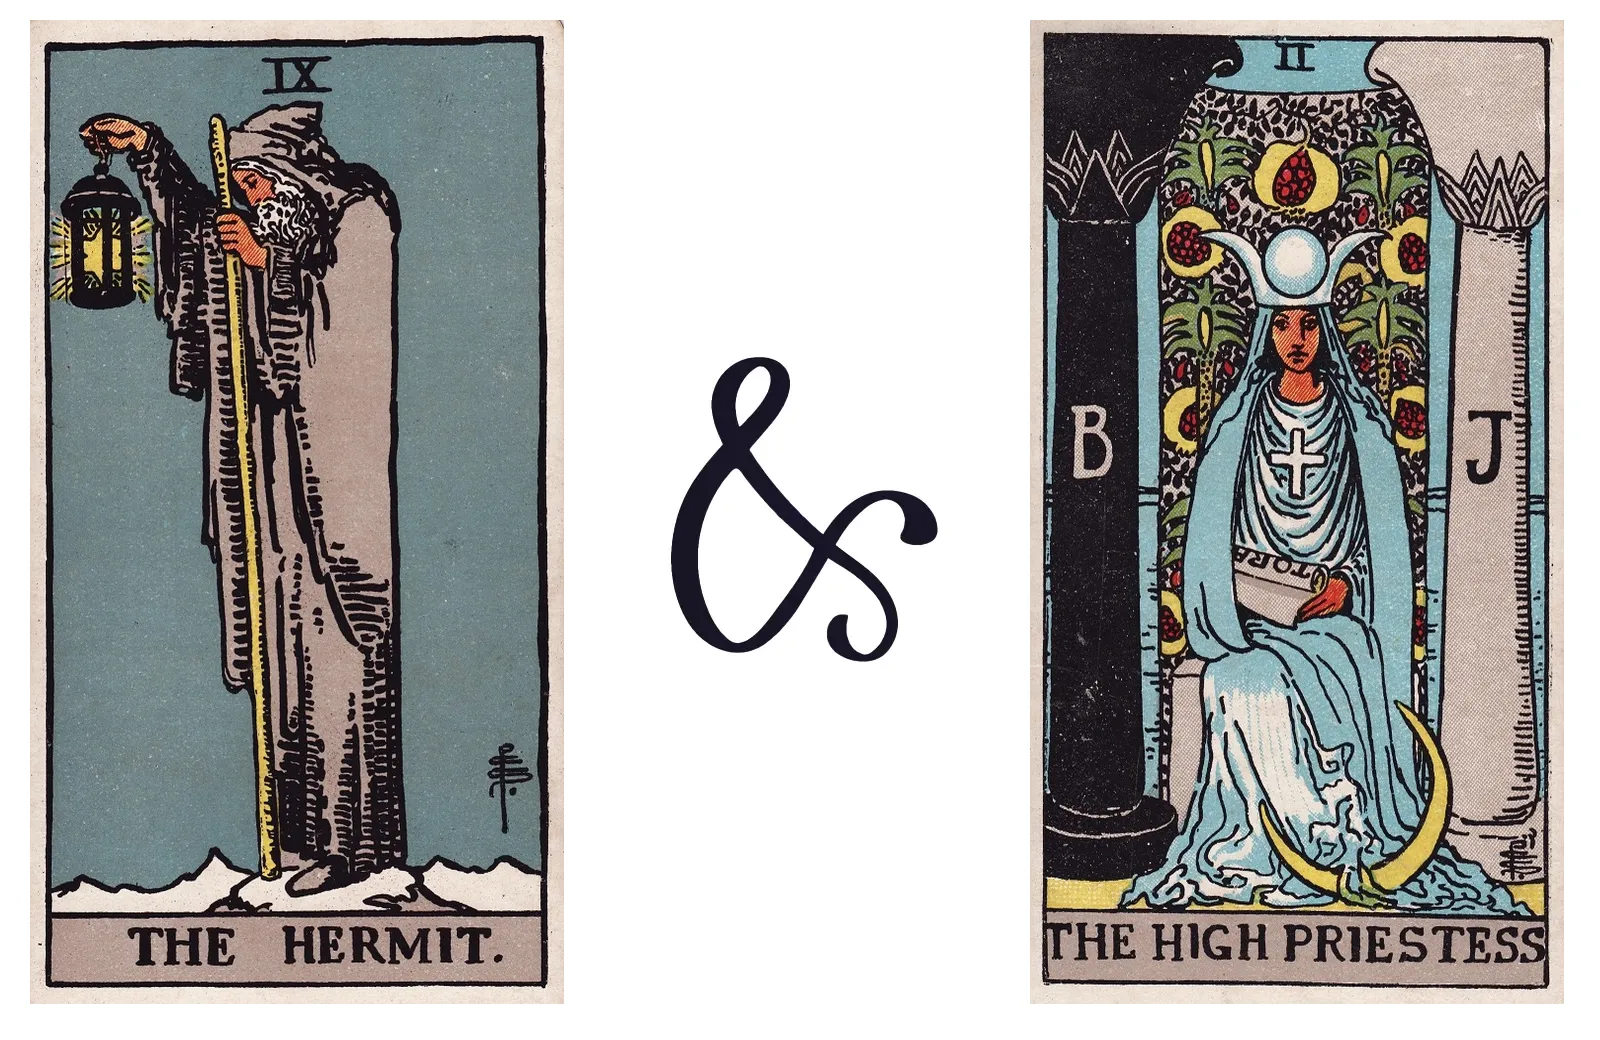 The Hermit and The High Priestess